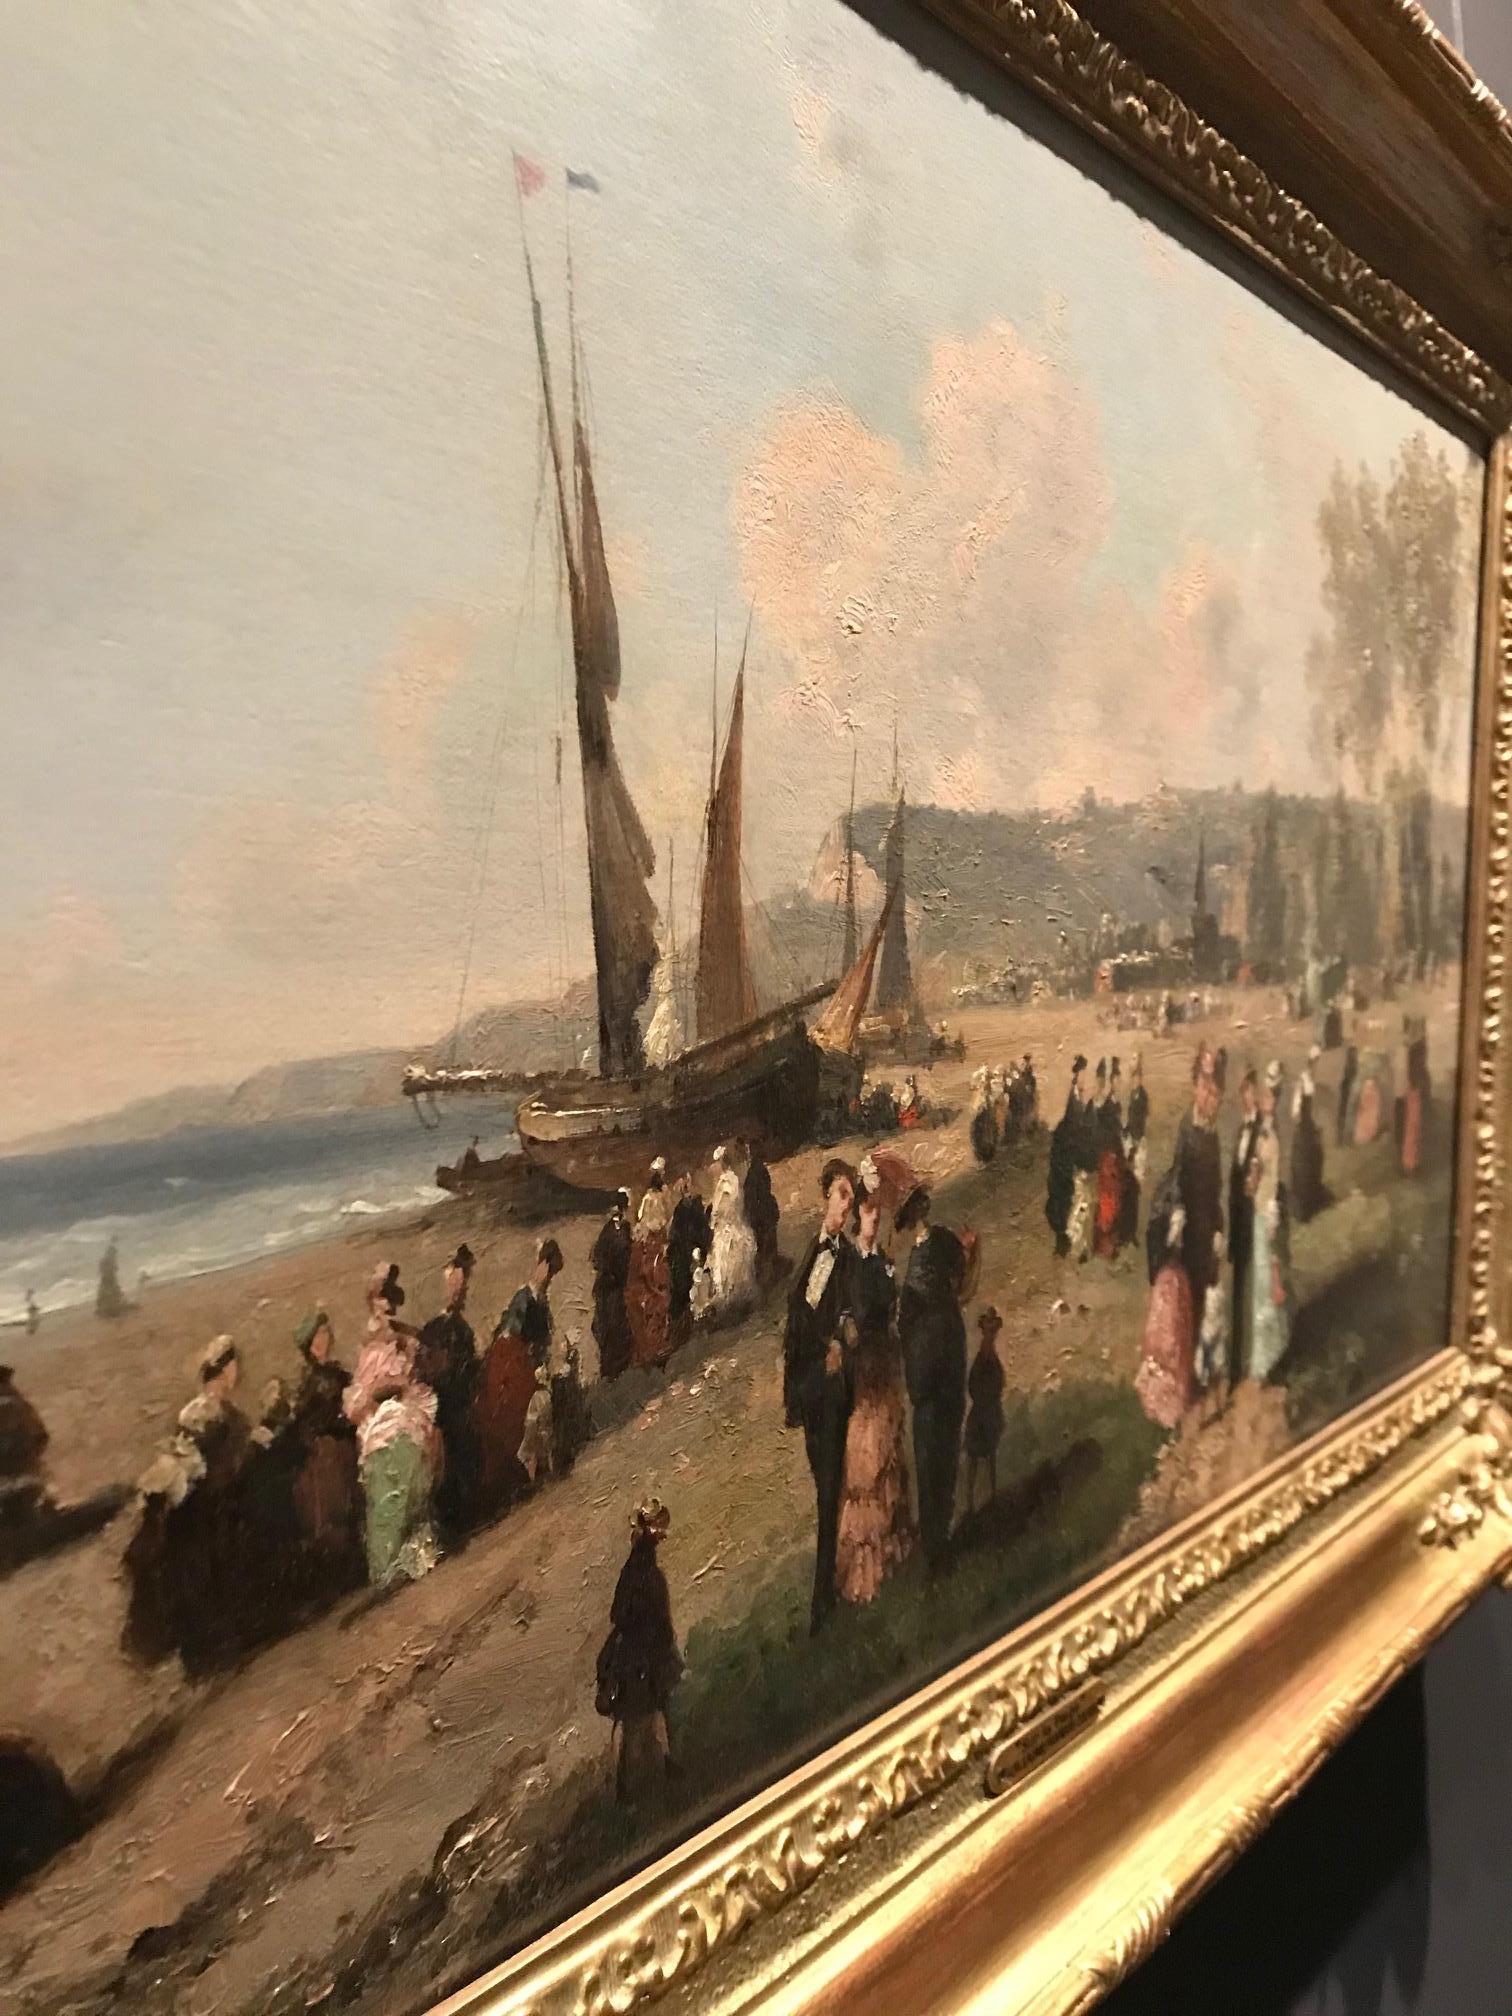 Guillaume-François Colson (1785-1860)
Sur la plage
oil on canvas
35 x 65 cm
signed 'Colson' (lower right)

Price:
£18,000 GBP

Provenance:
MacConnal-Mason Fine Paintings
Private collection, London (acquired from the above on 18 June